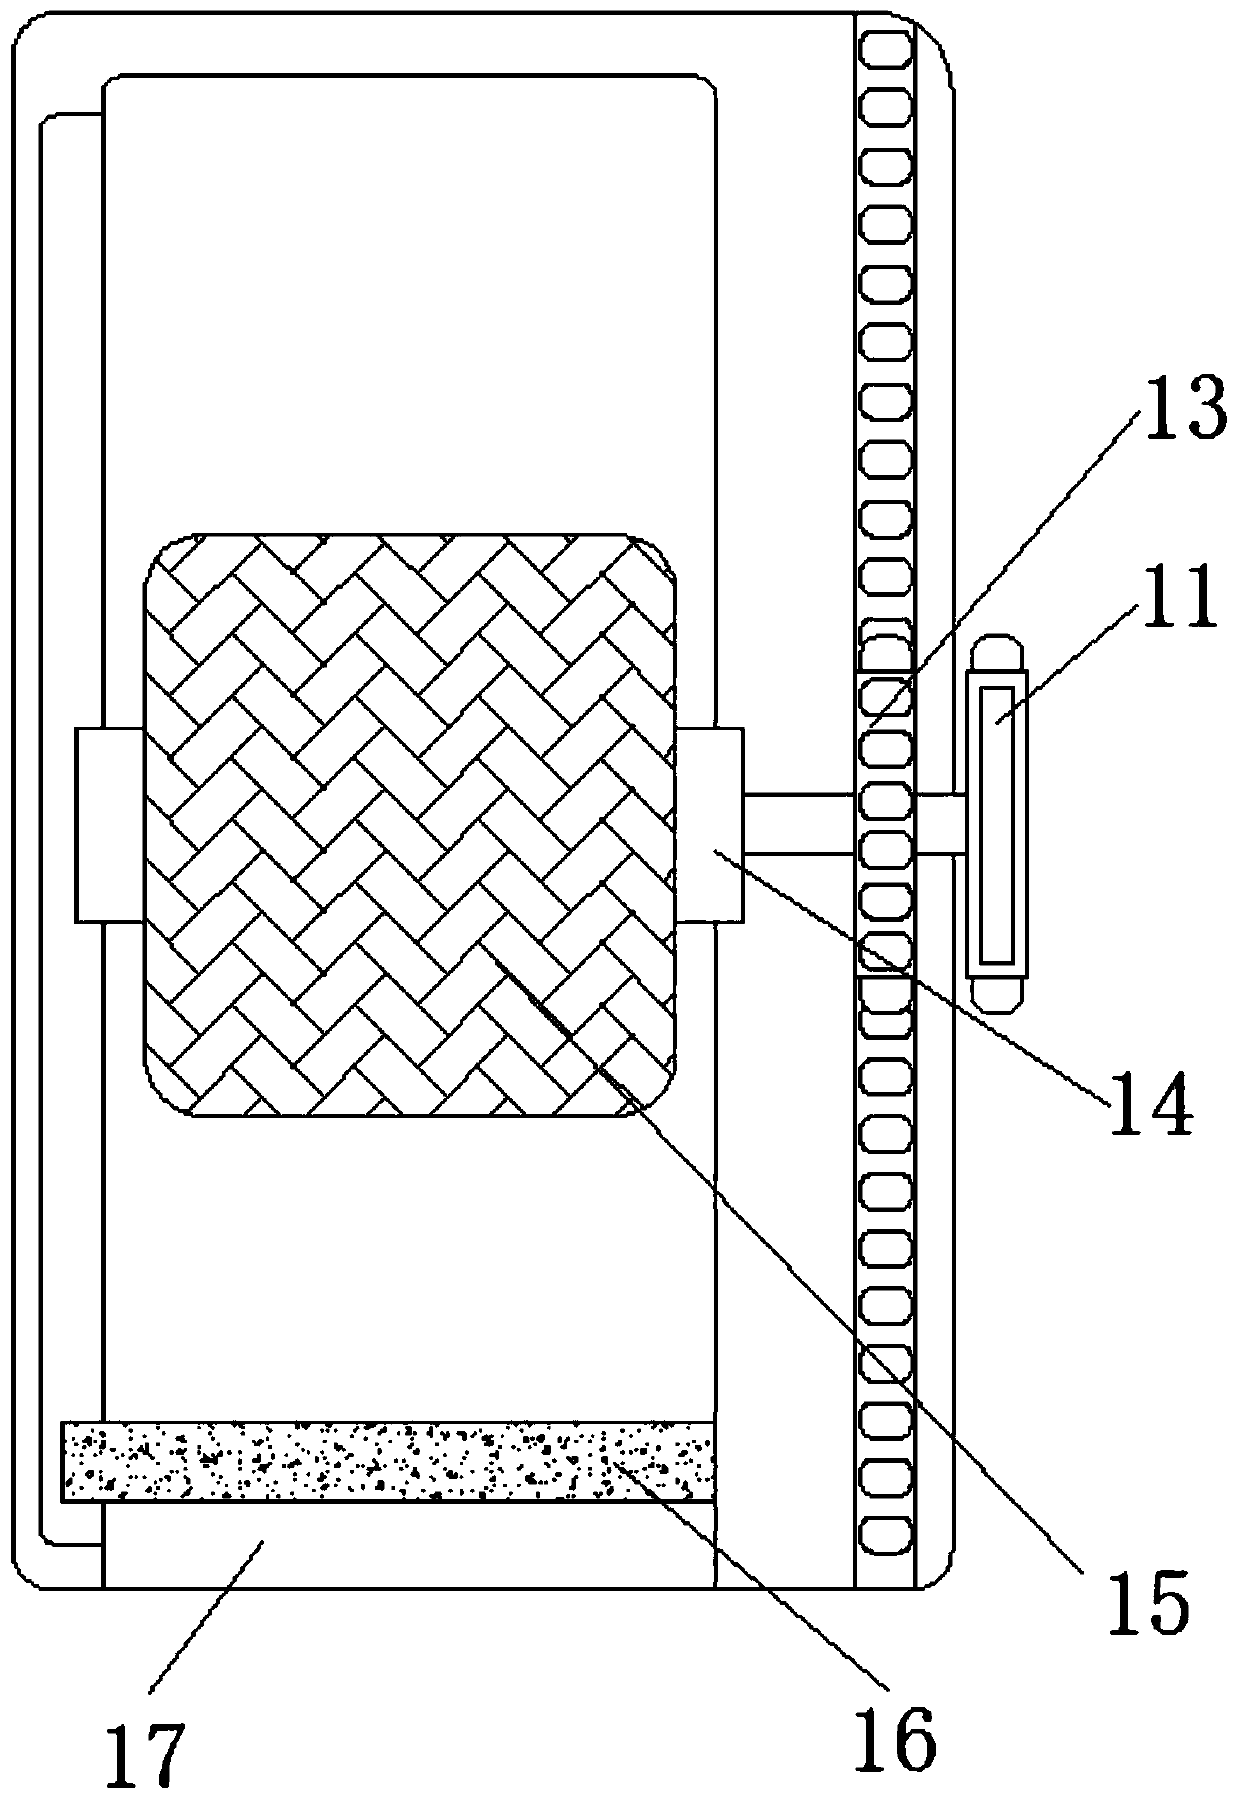 Even-grinding organic fireproof blocking material grinding device